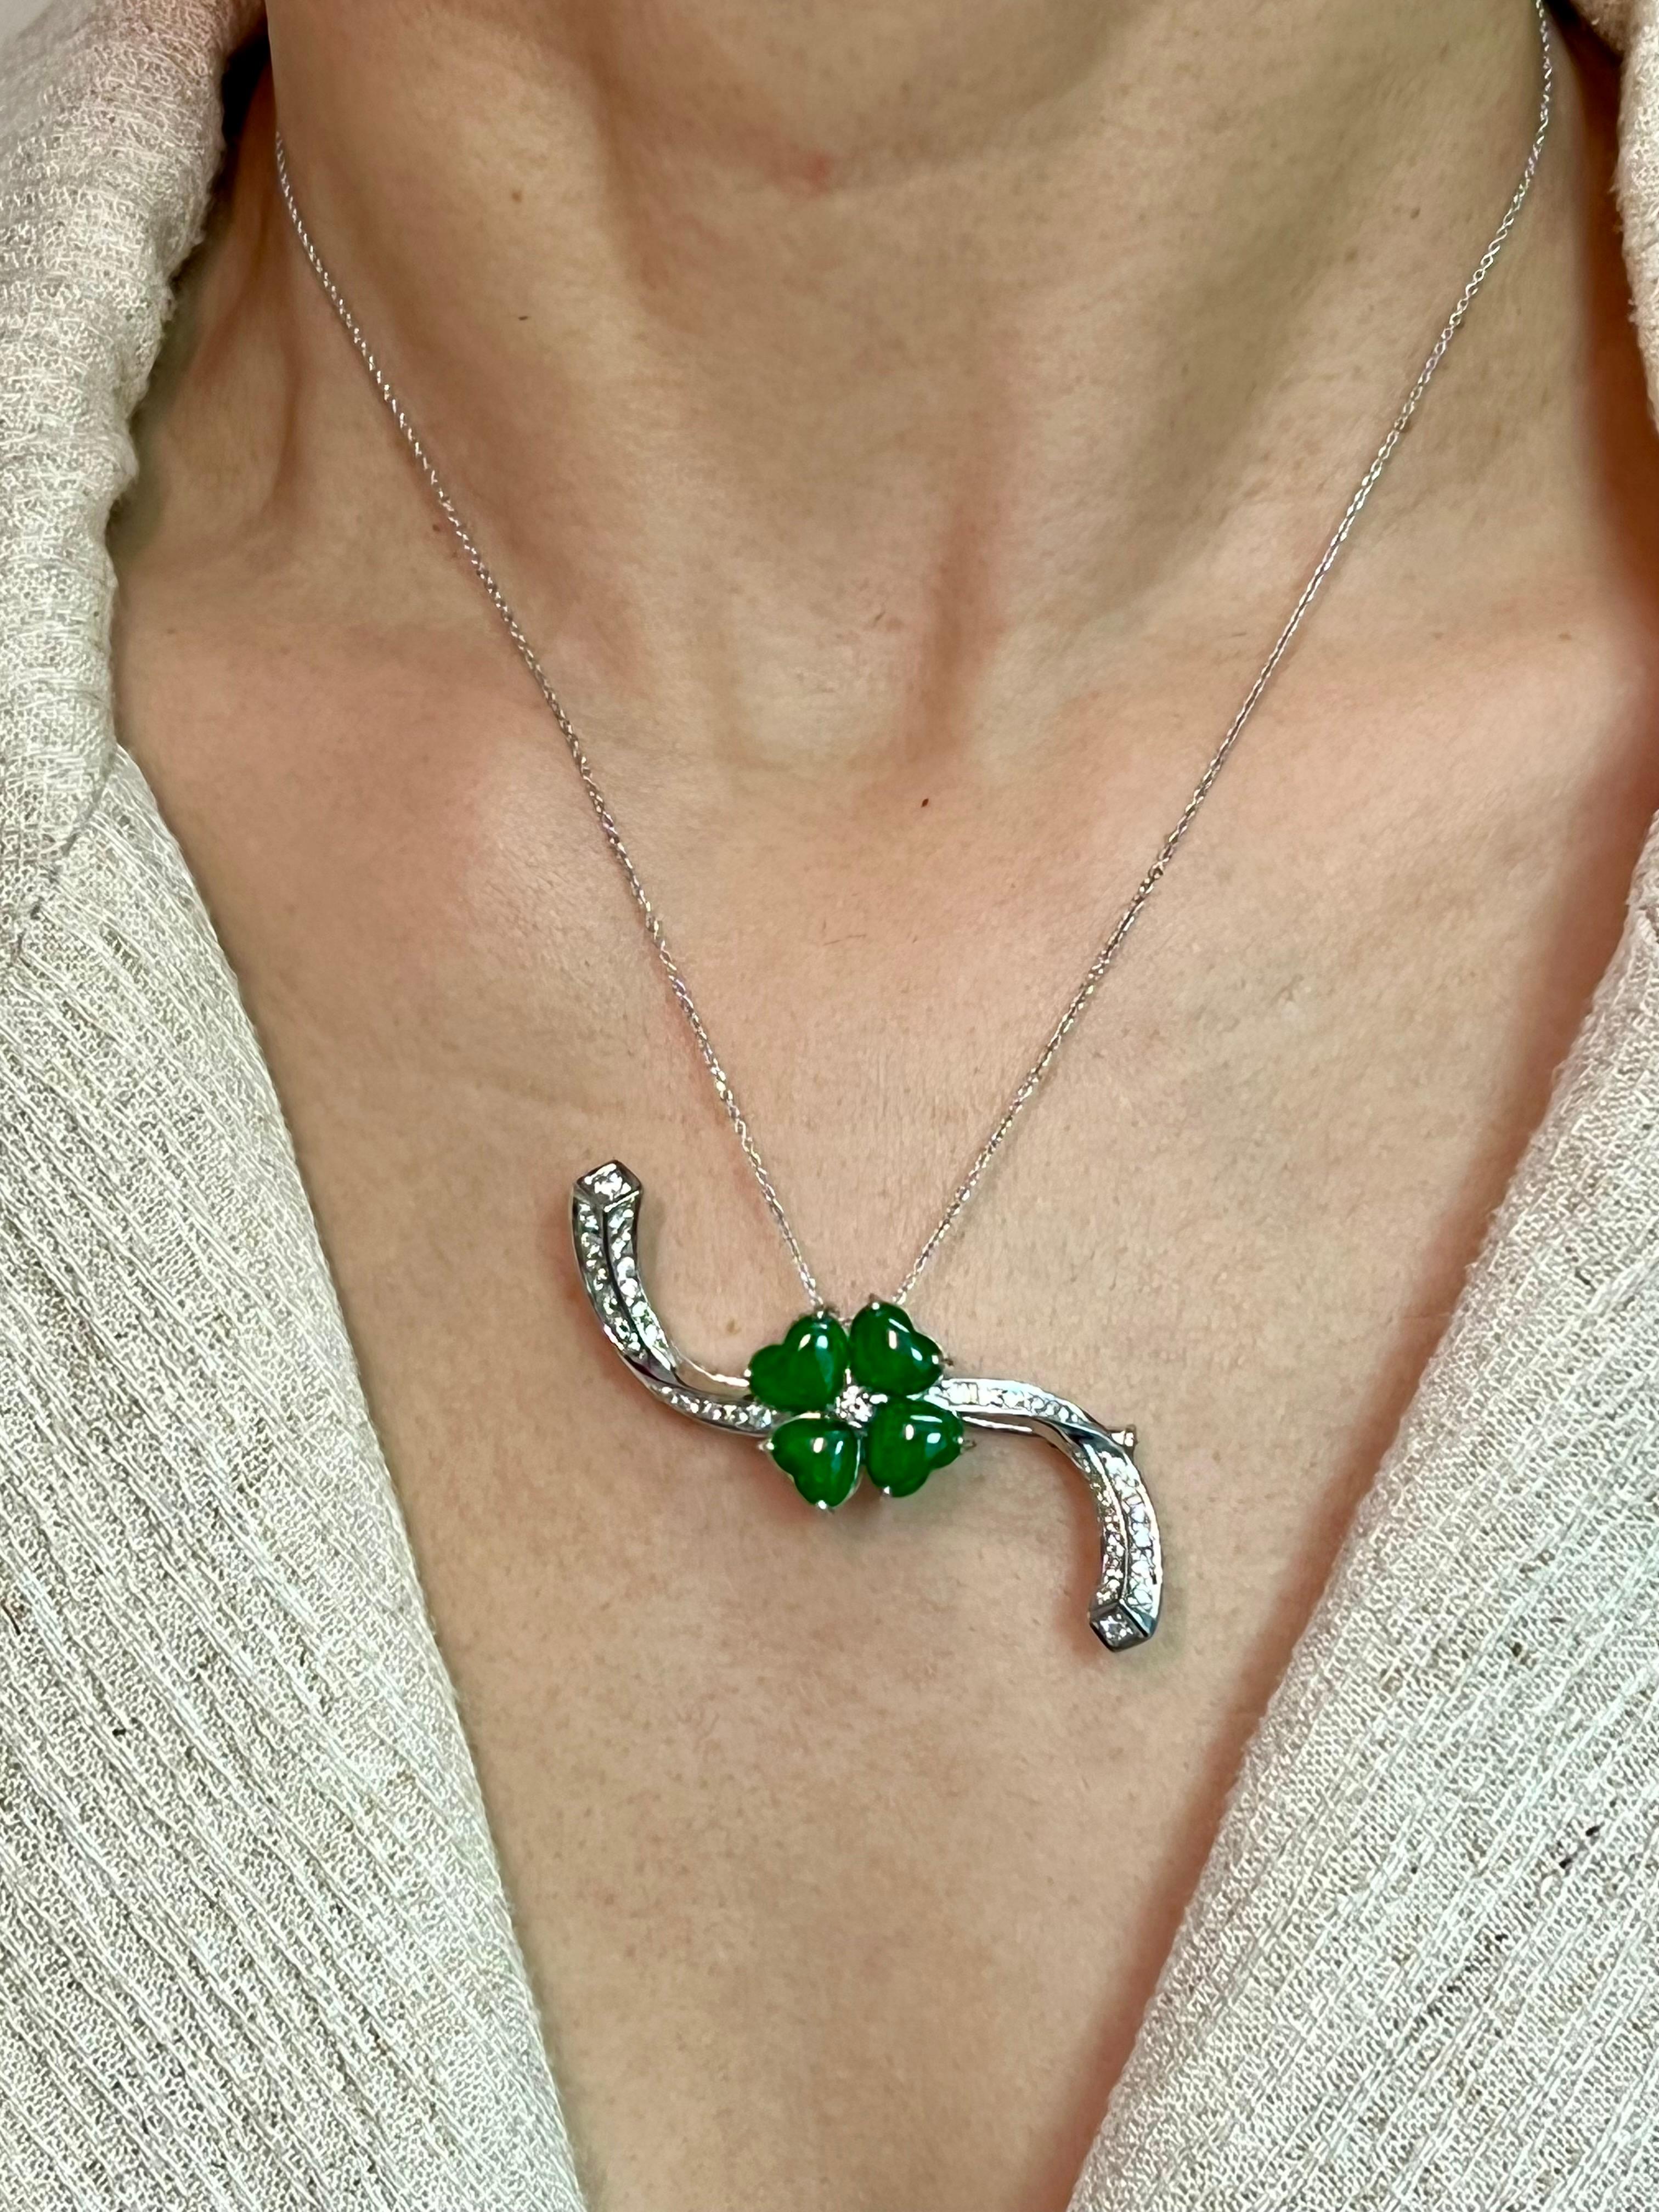 Please check out the HD video. This apple green jadeite jade four leaf clover pendant / brooch is very colorful and eye catching! This is certified to be natural jadeite jade. The pendant / brooch is set in 18k white gold. There are 4 heart shaped